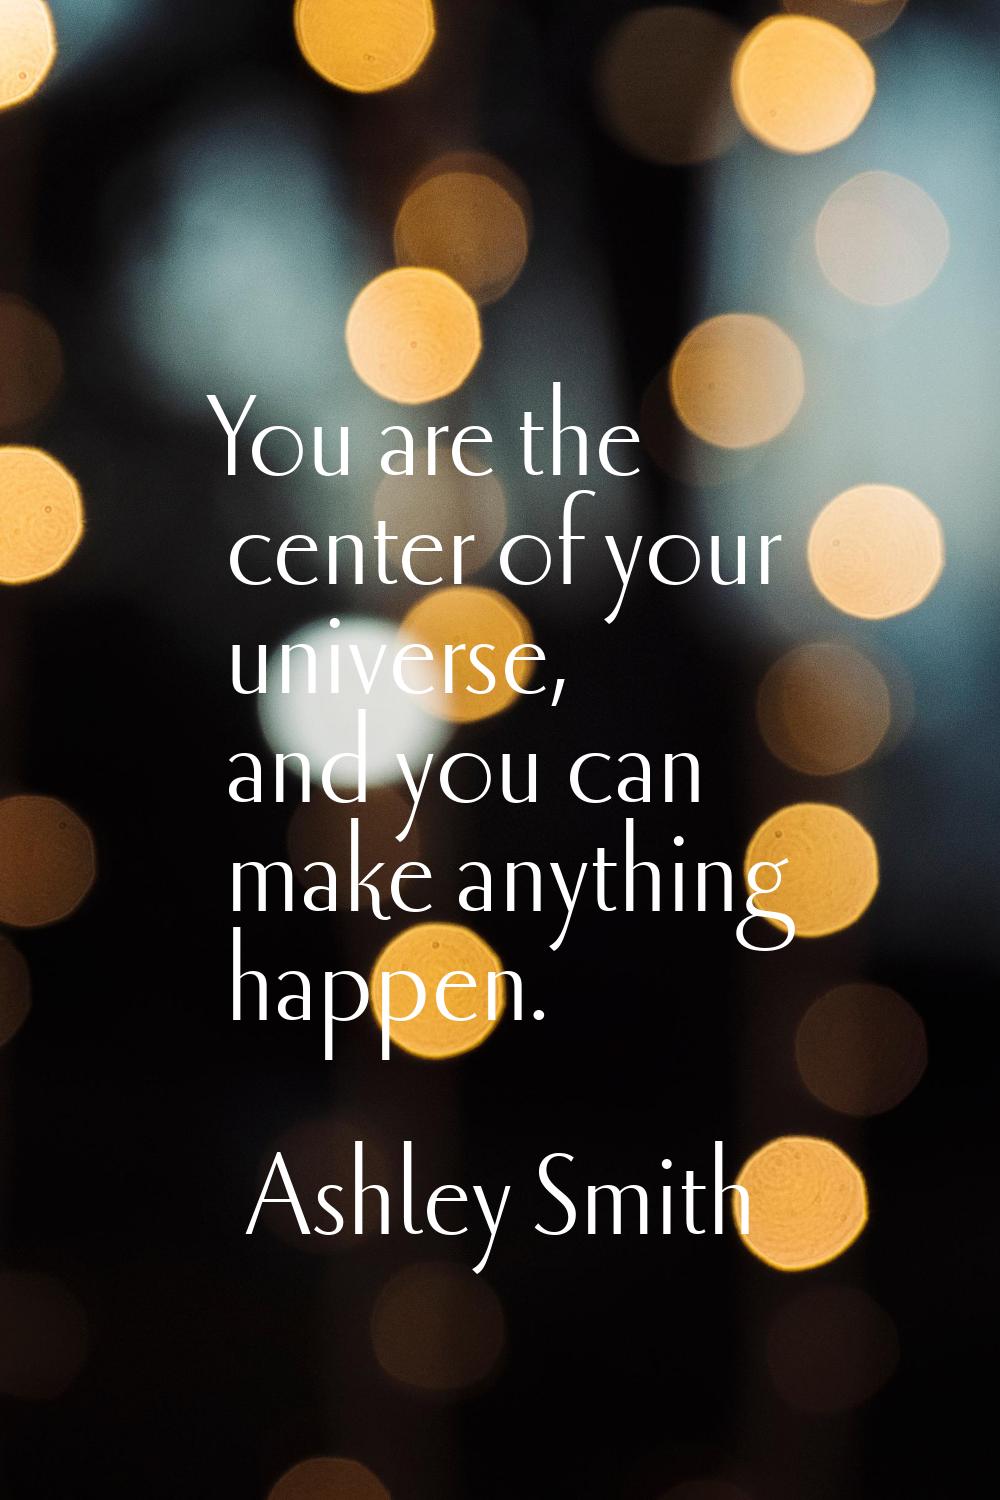 You are the center of your universe, and you can make anything happen.